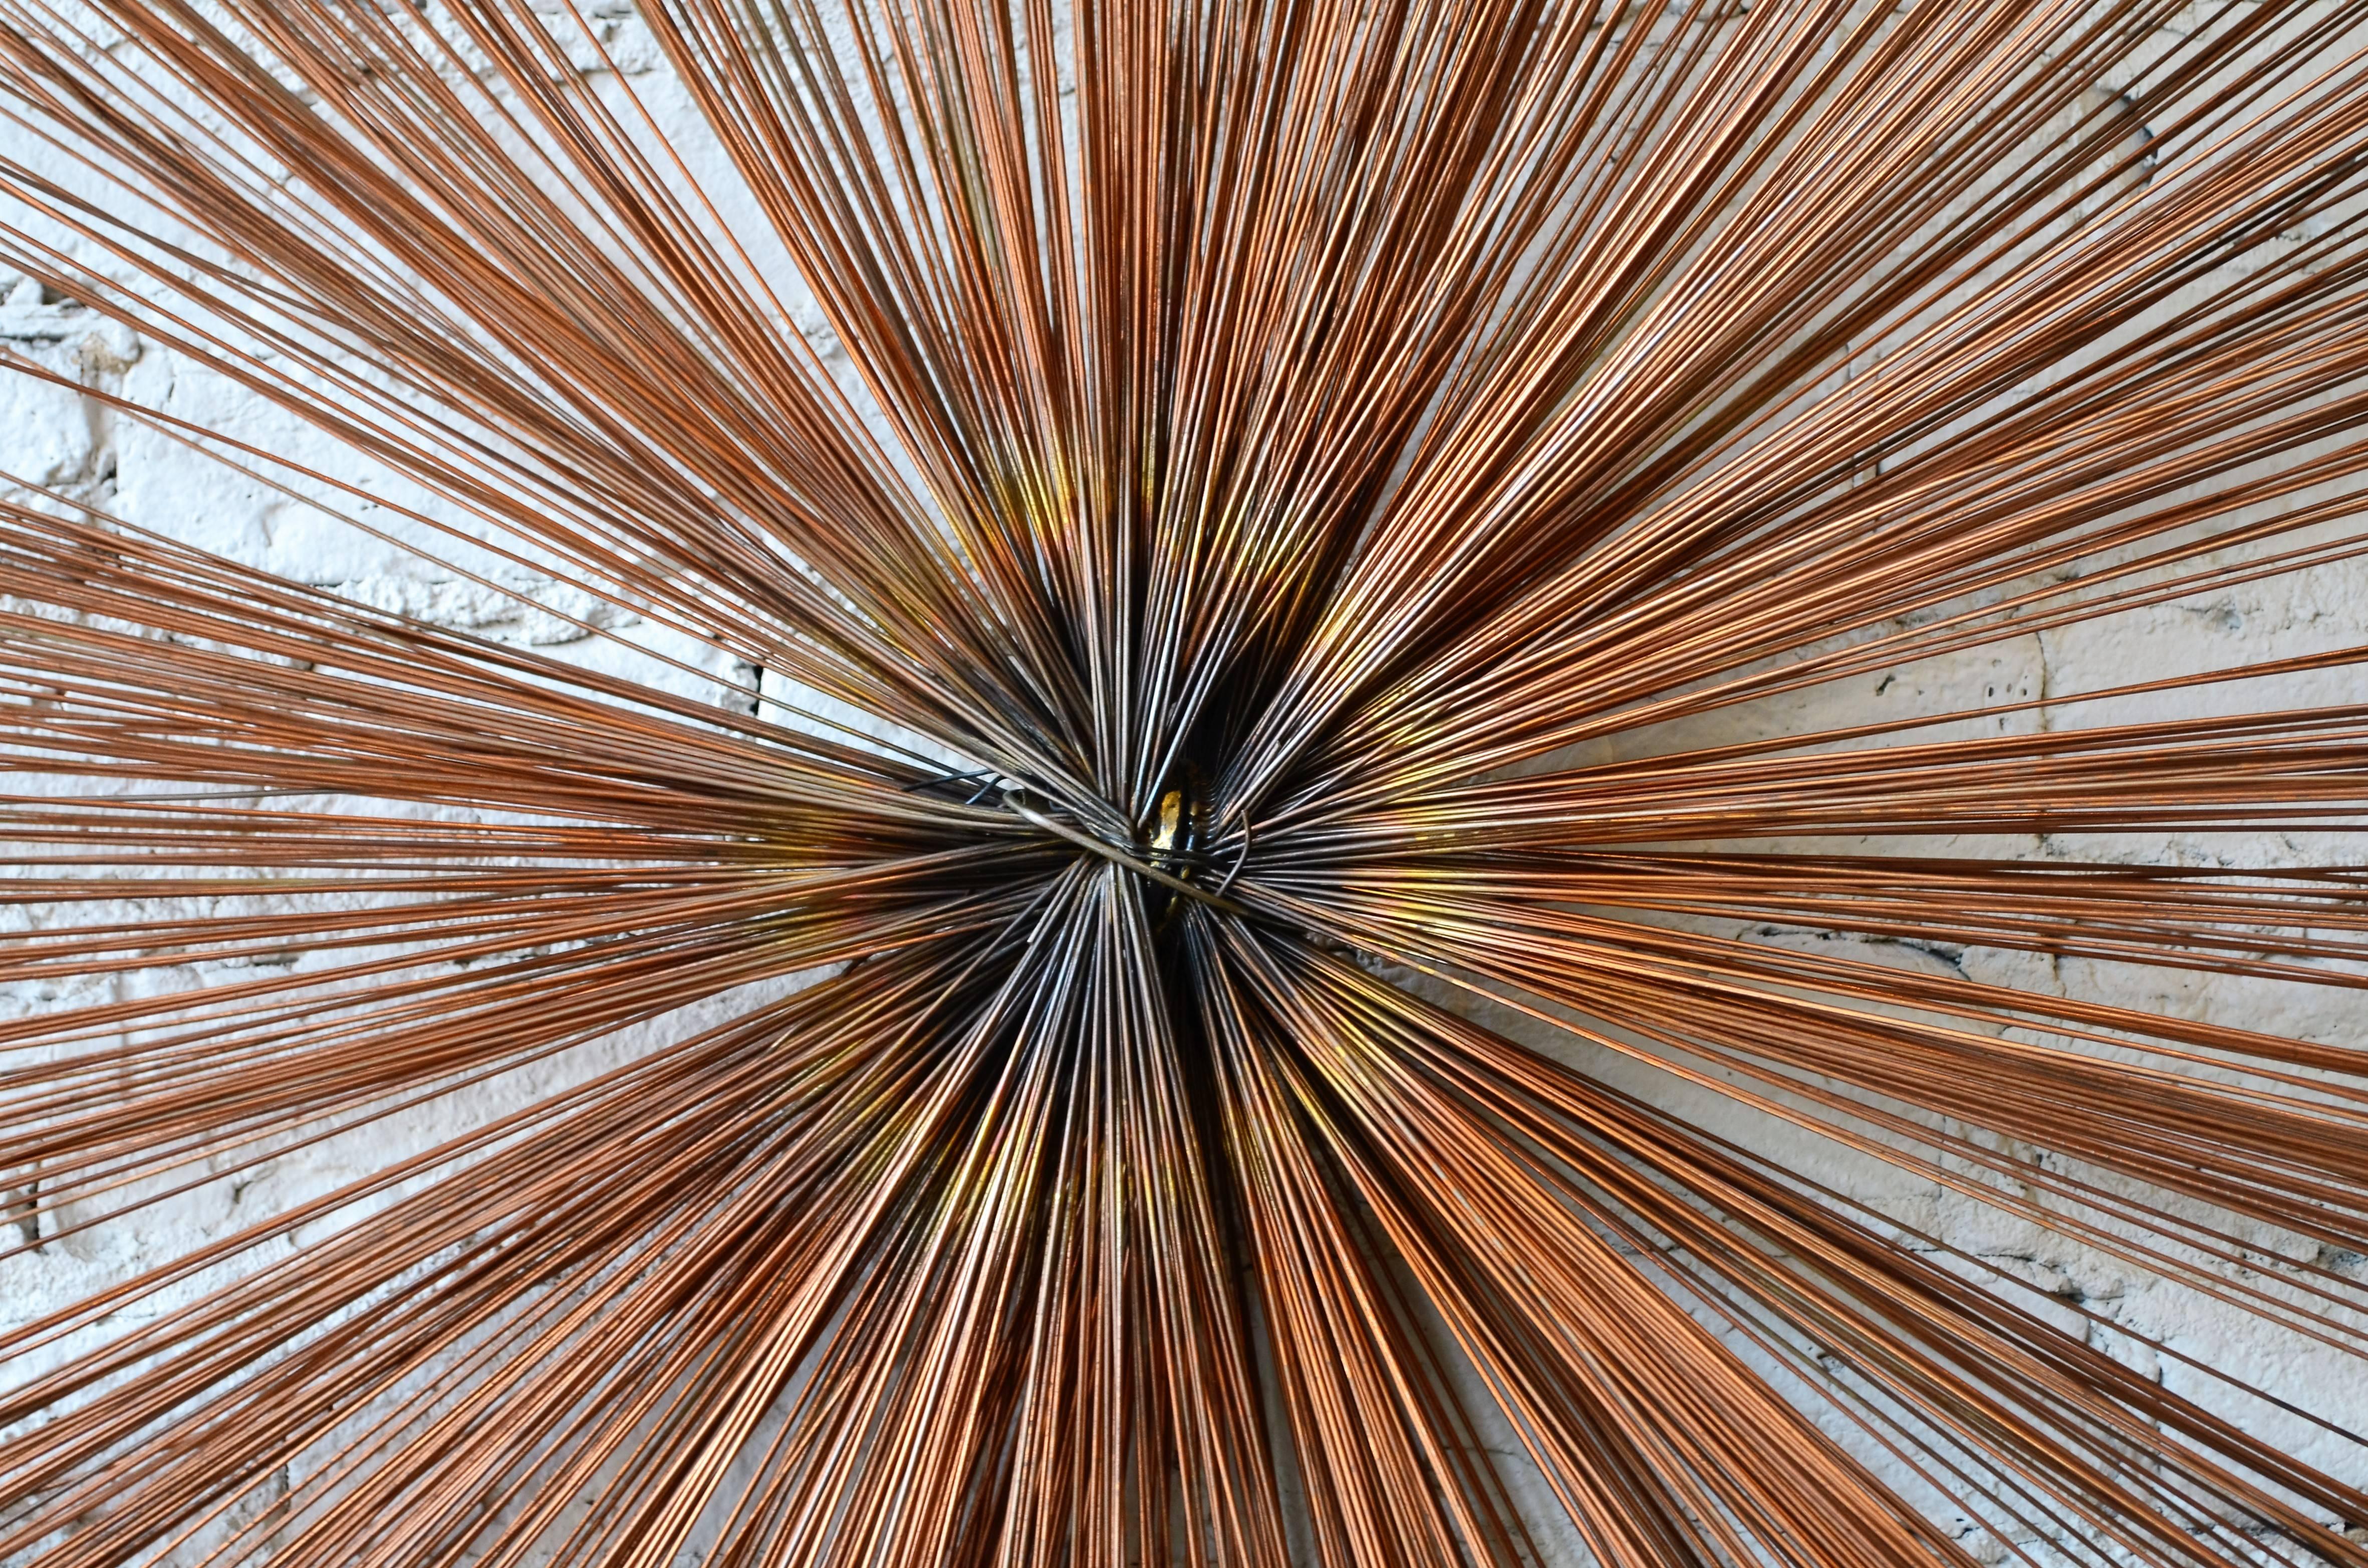 Starburst wall sculpture.
Unlike its Curtis Jere starburst counterparts, this piece is comprised
of multiple concentric layers of metal spokes. It has a dark bronze patina
finish. Outstanding quality.